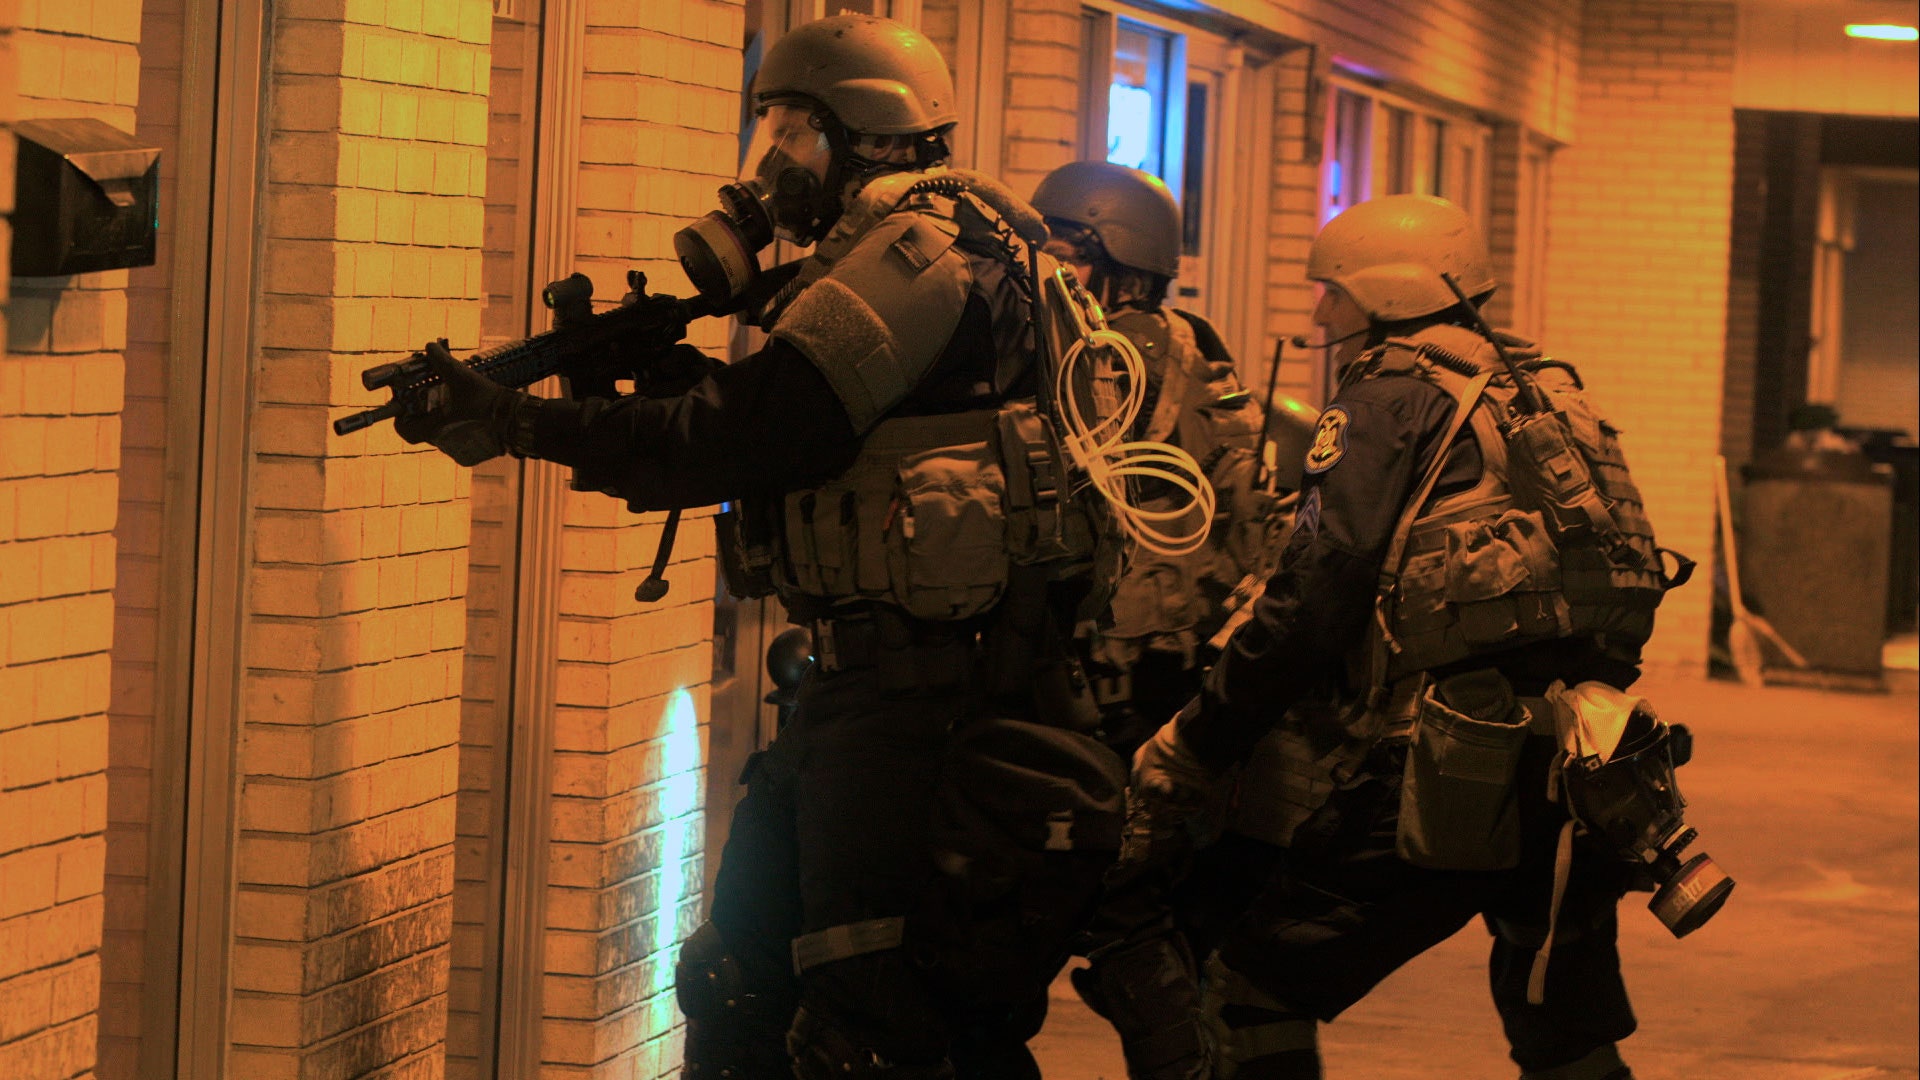 Do Not Resist” and the Crisis of Police Militarization. The New Yorker